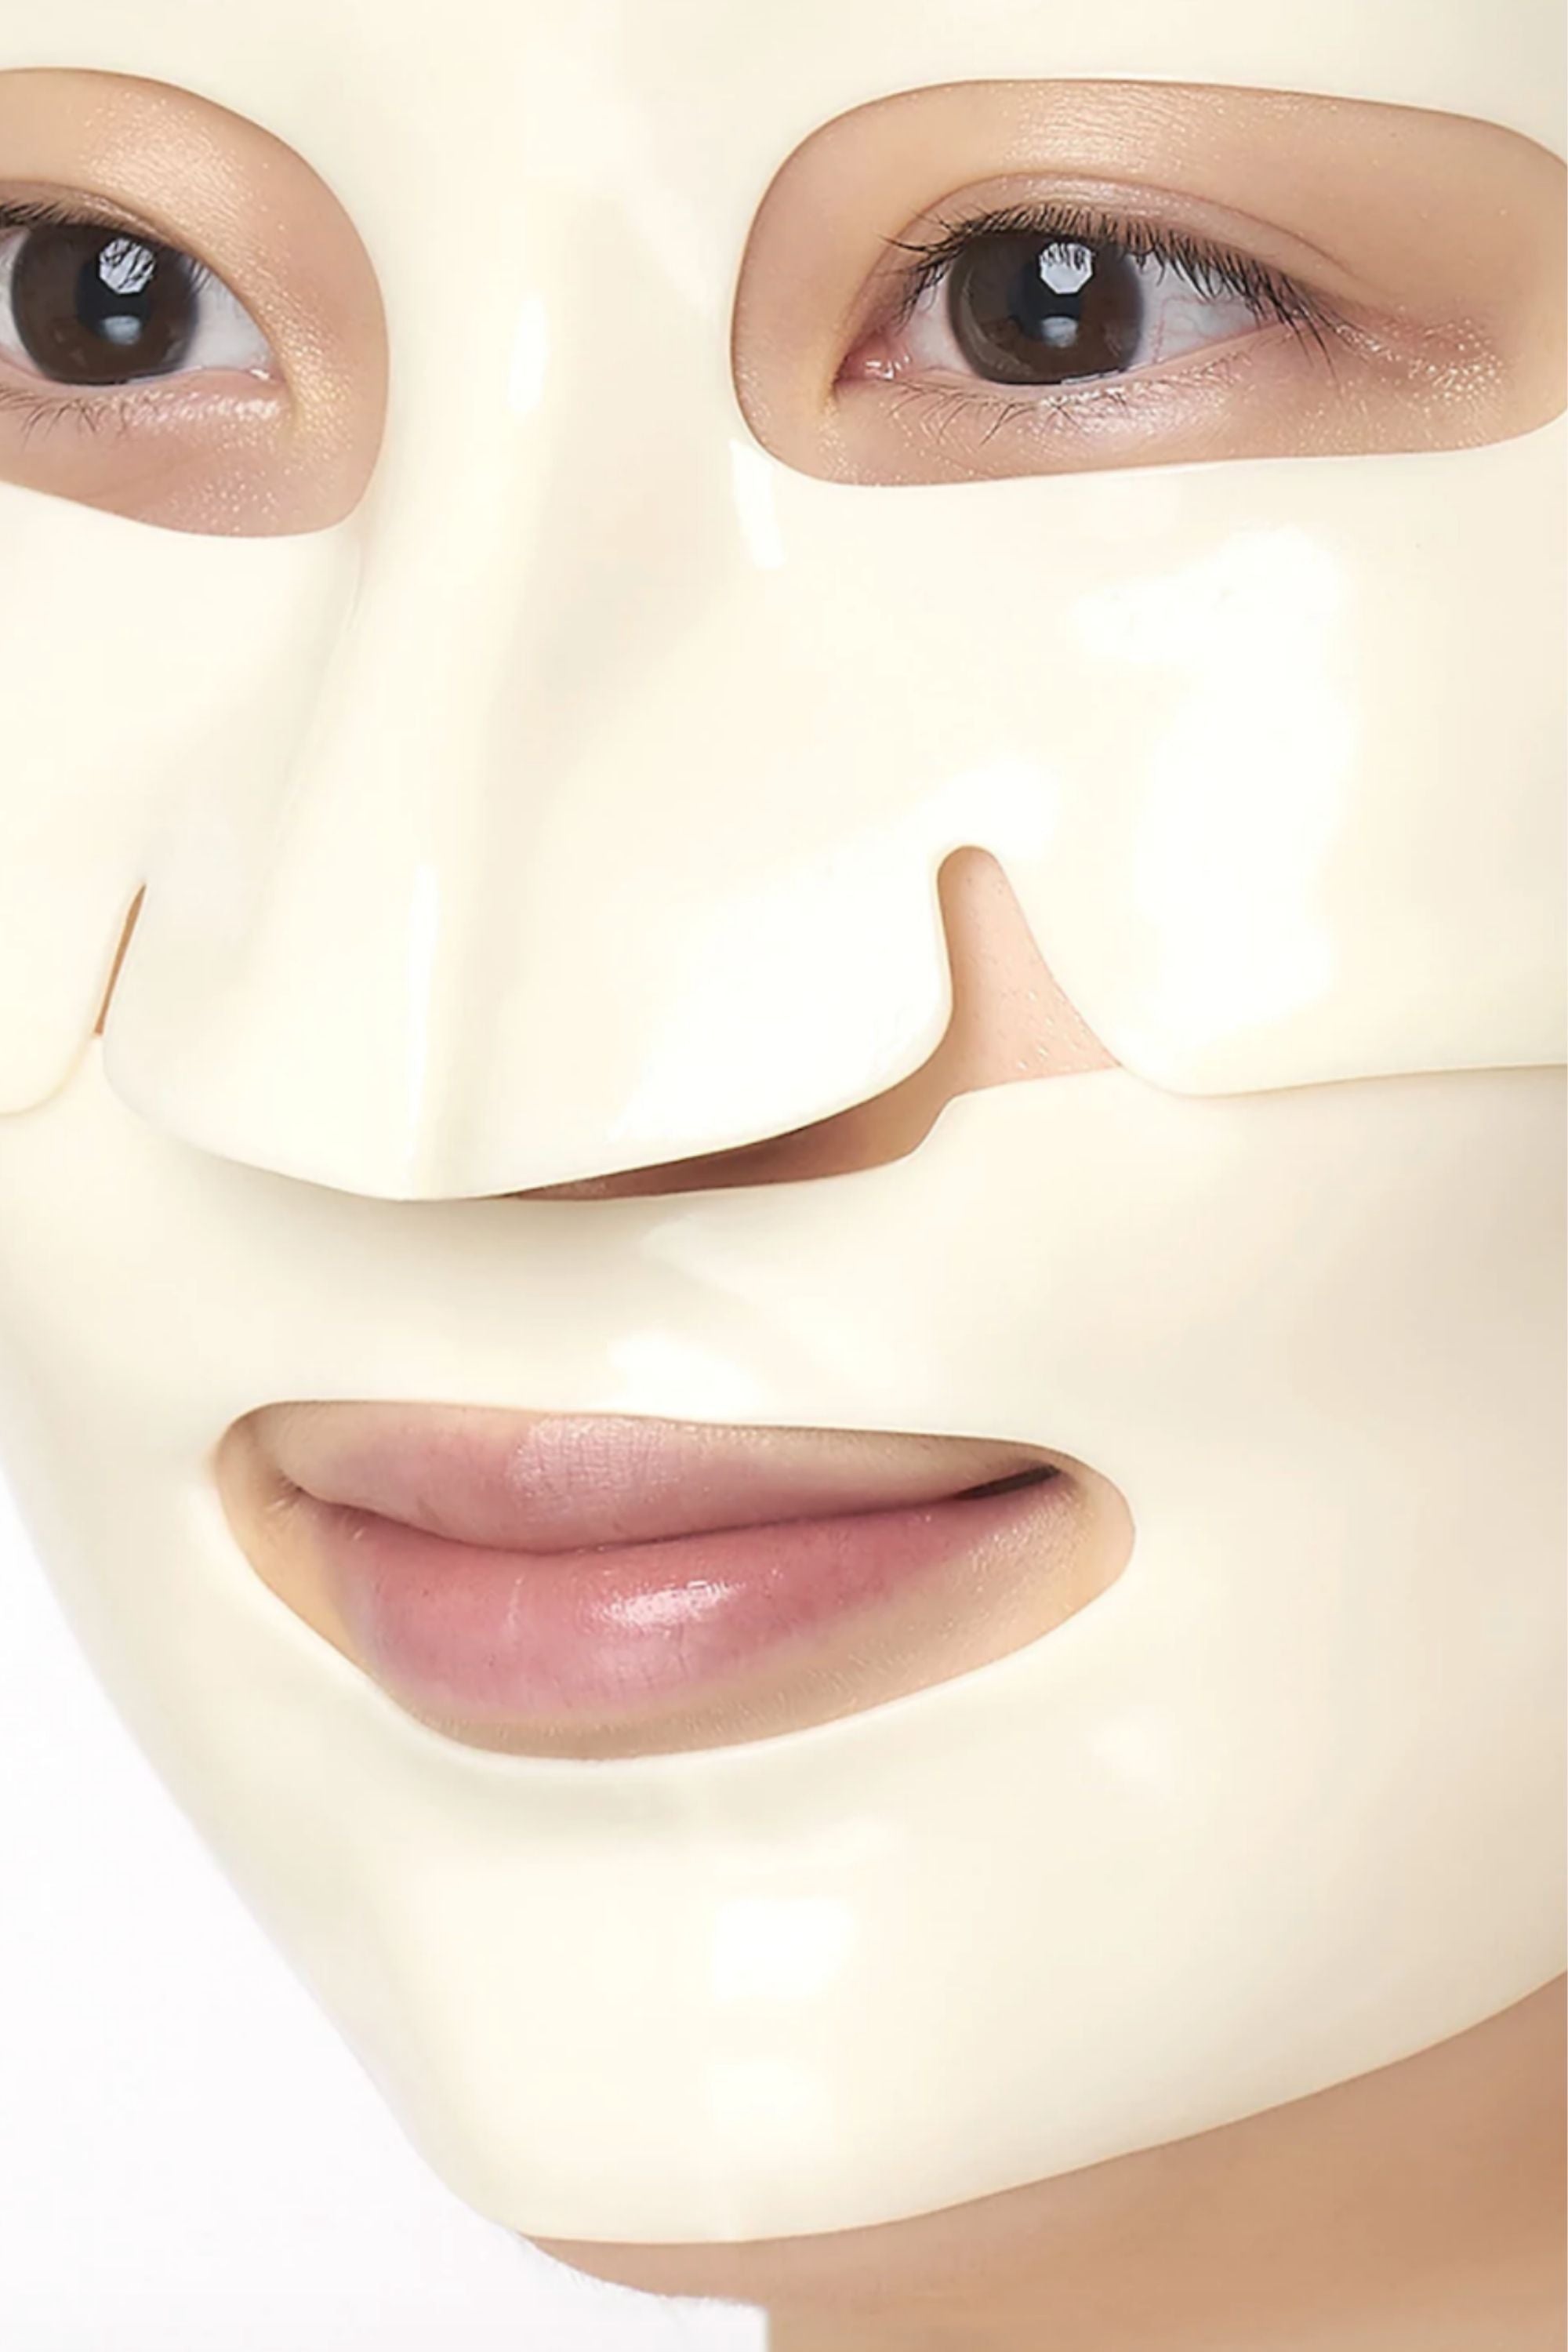 Dr. Jart+ - Cryo Rubber™ Mask with Brightening Vitamin C - 1pc